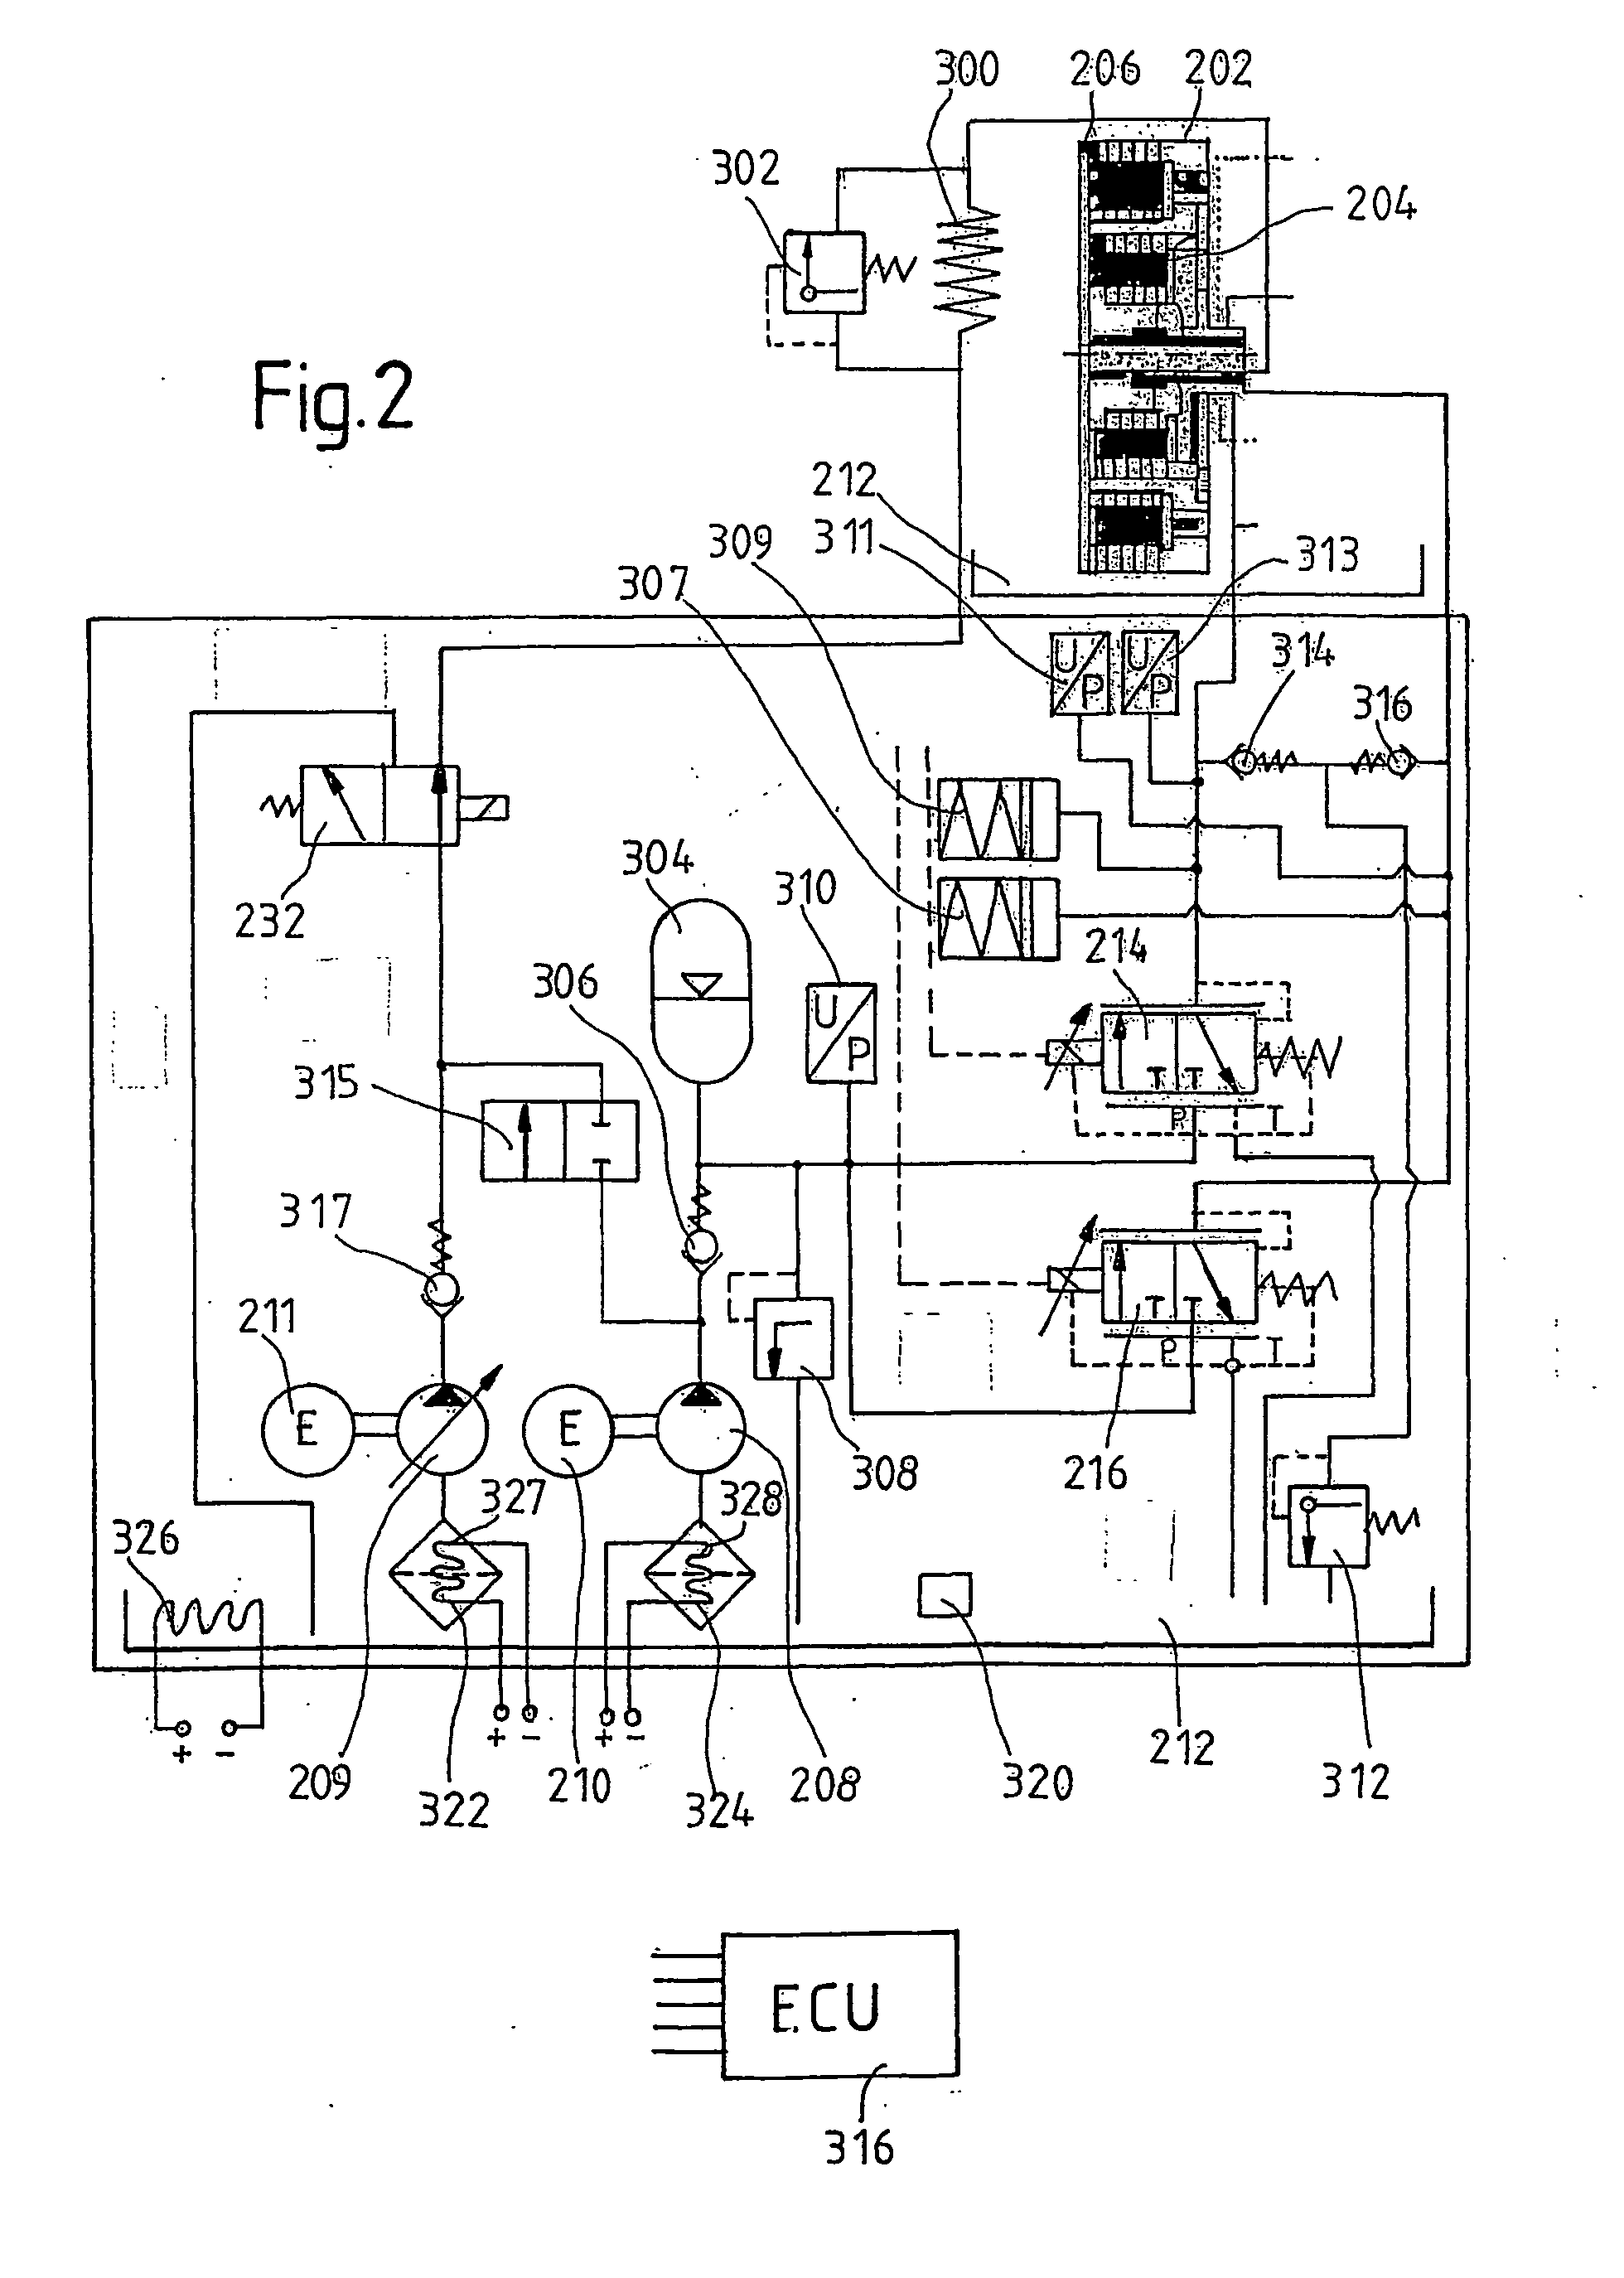 Motor vehicle comprising a drive train having a multiple clutch drive